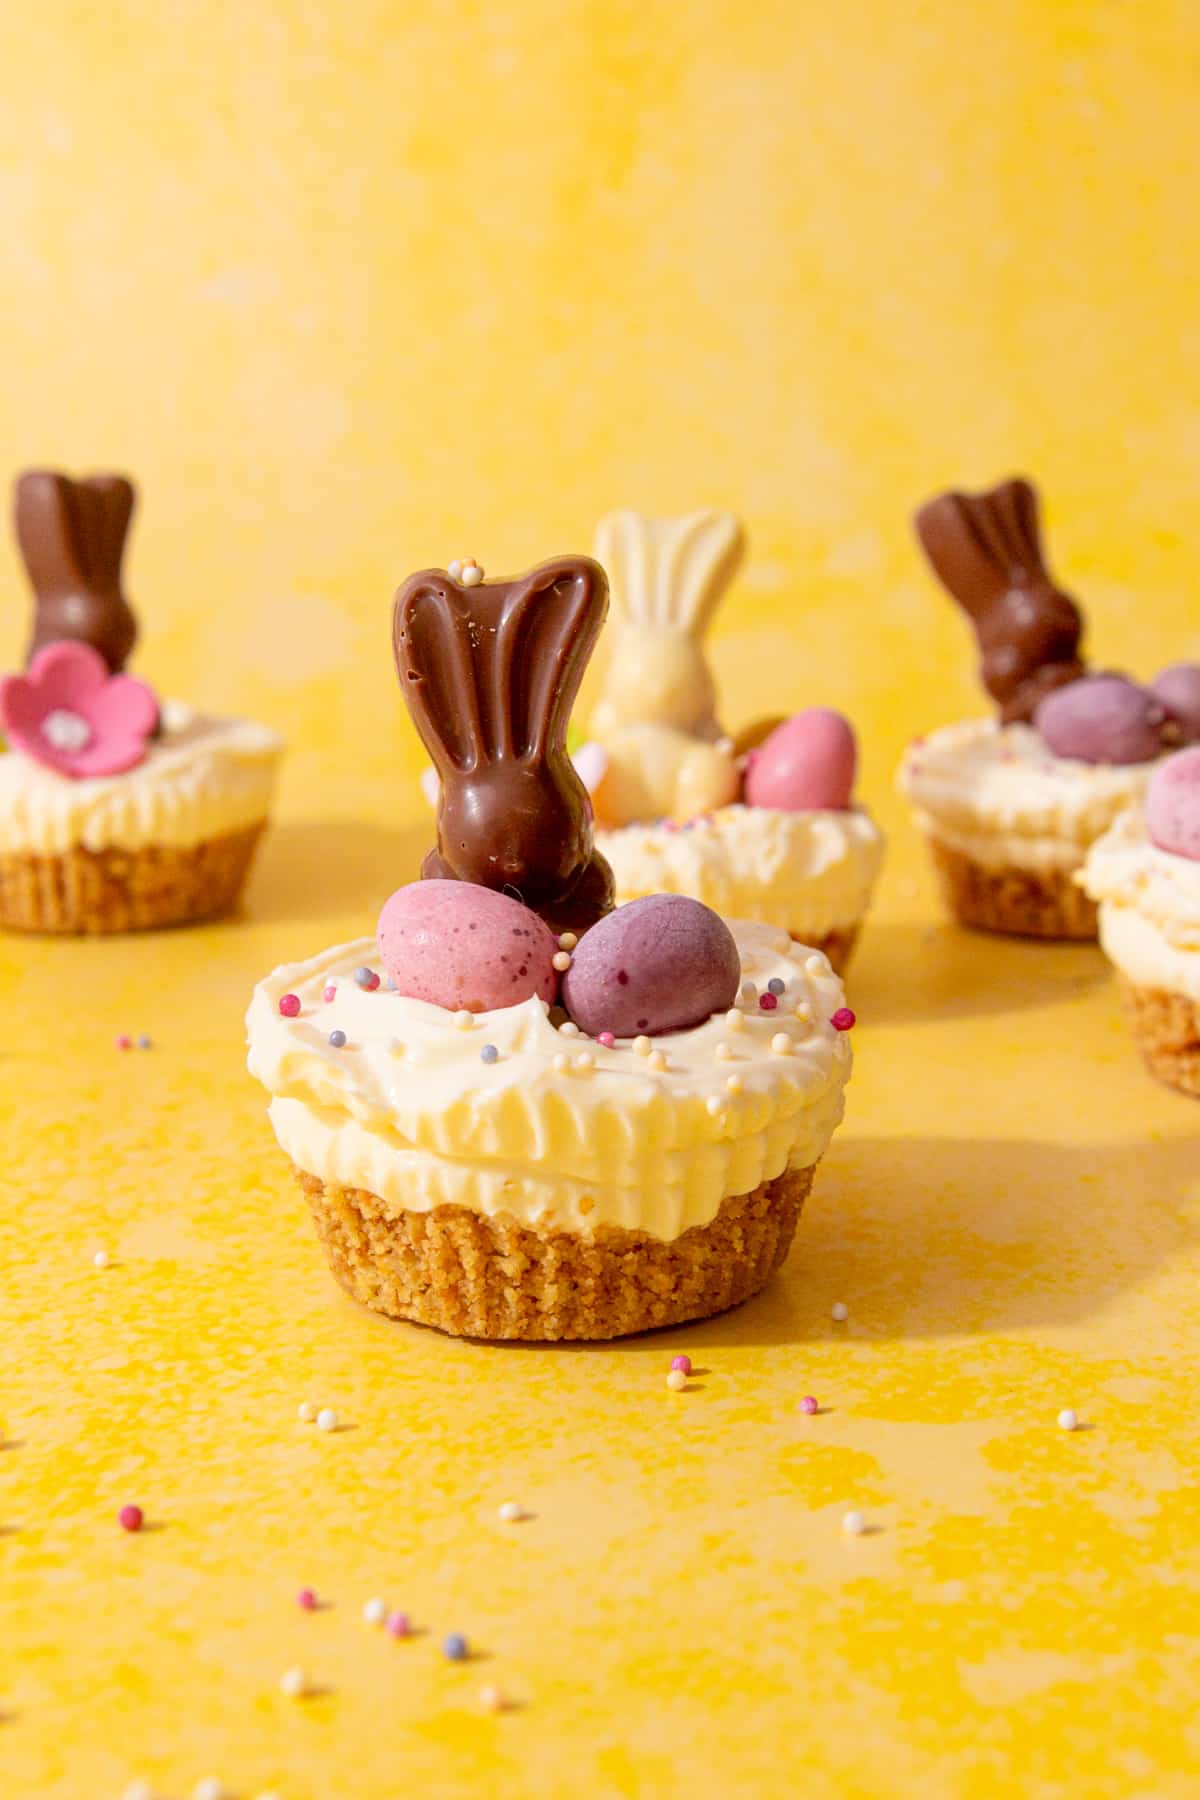 A few mini cheesecakes decorated with chocolate Easter bunnies, flowers and sprinkles on a yellow background.